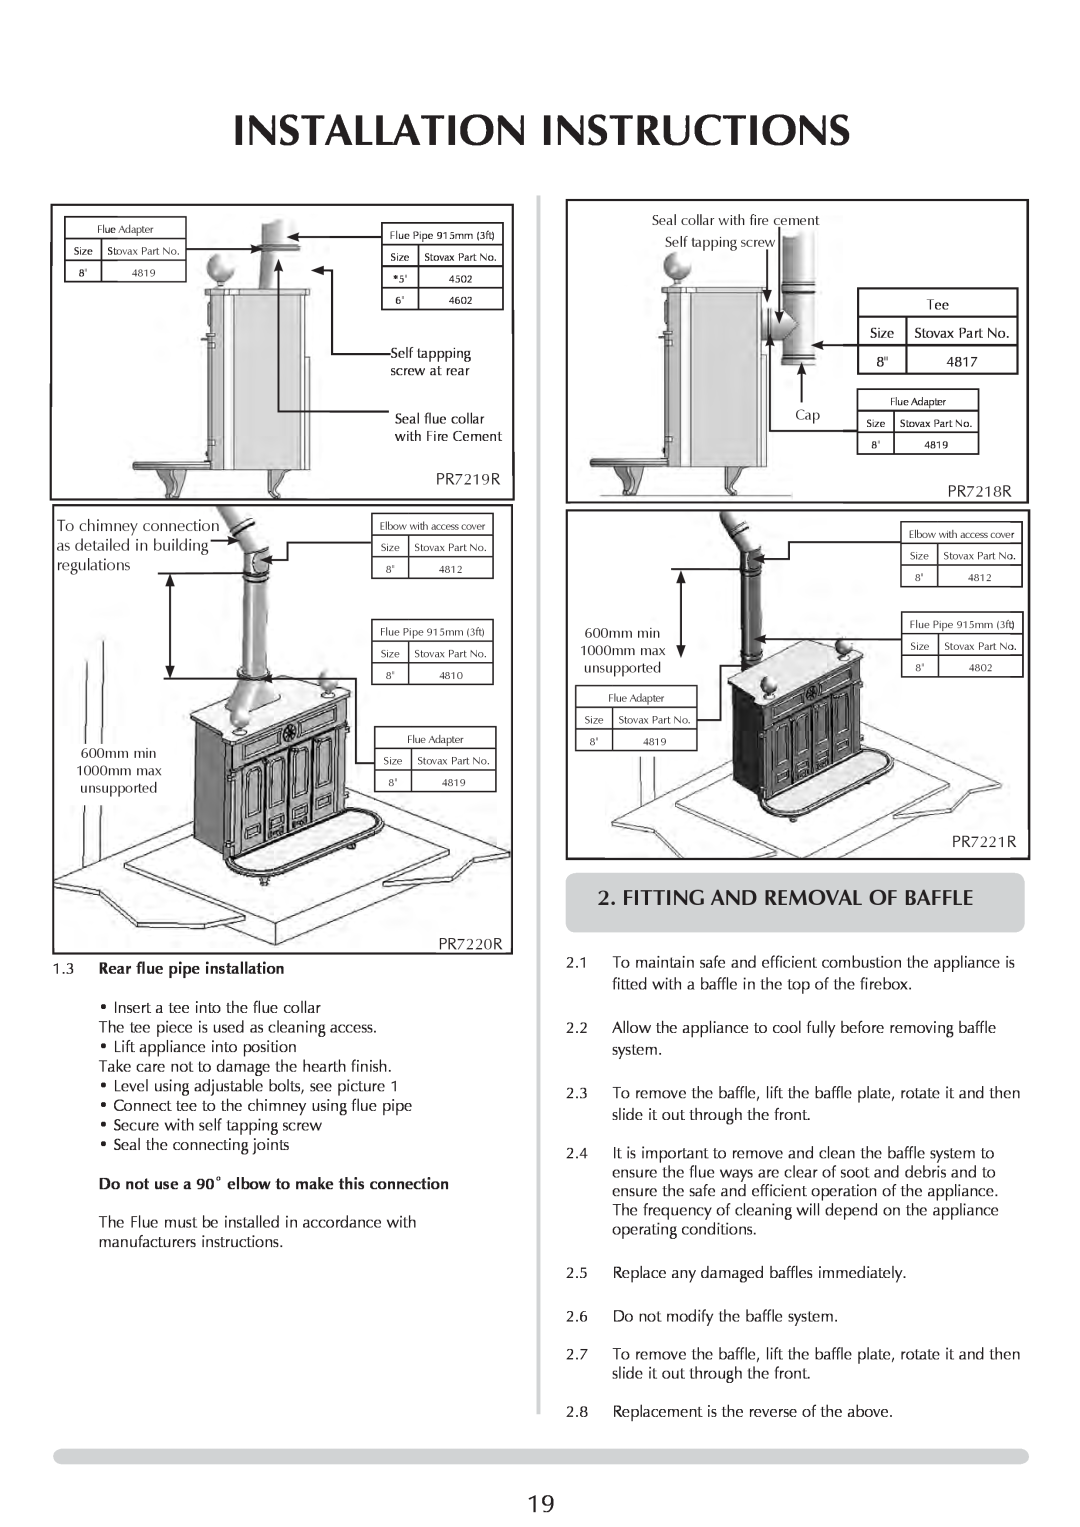 Stovax 1001 Fitting And Removal Of Baffle, Rear flue pipe installation, Do not use a 90˚ elbow to make this connection 